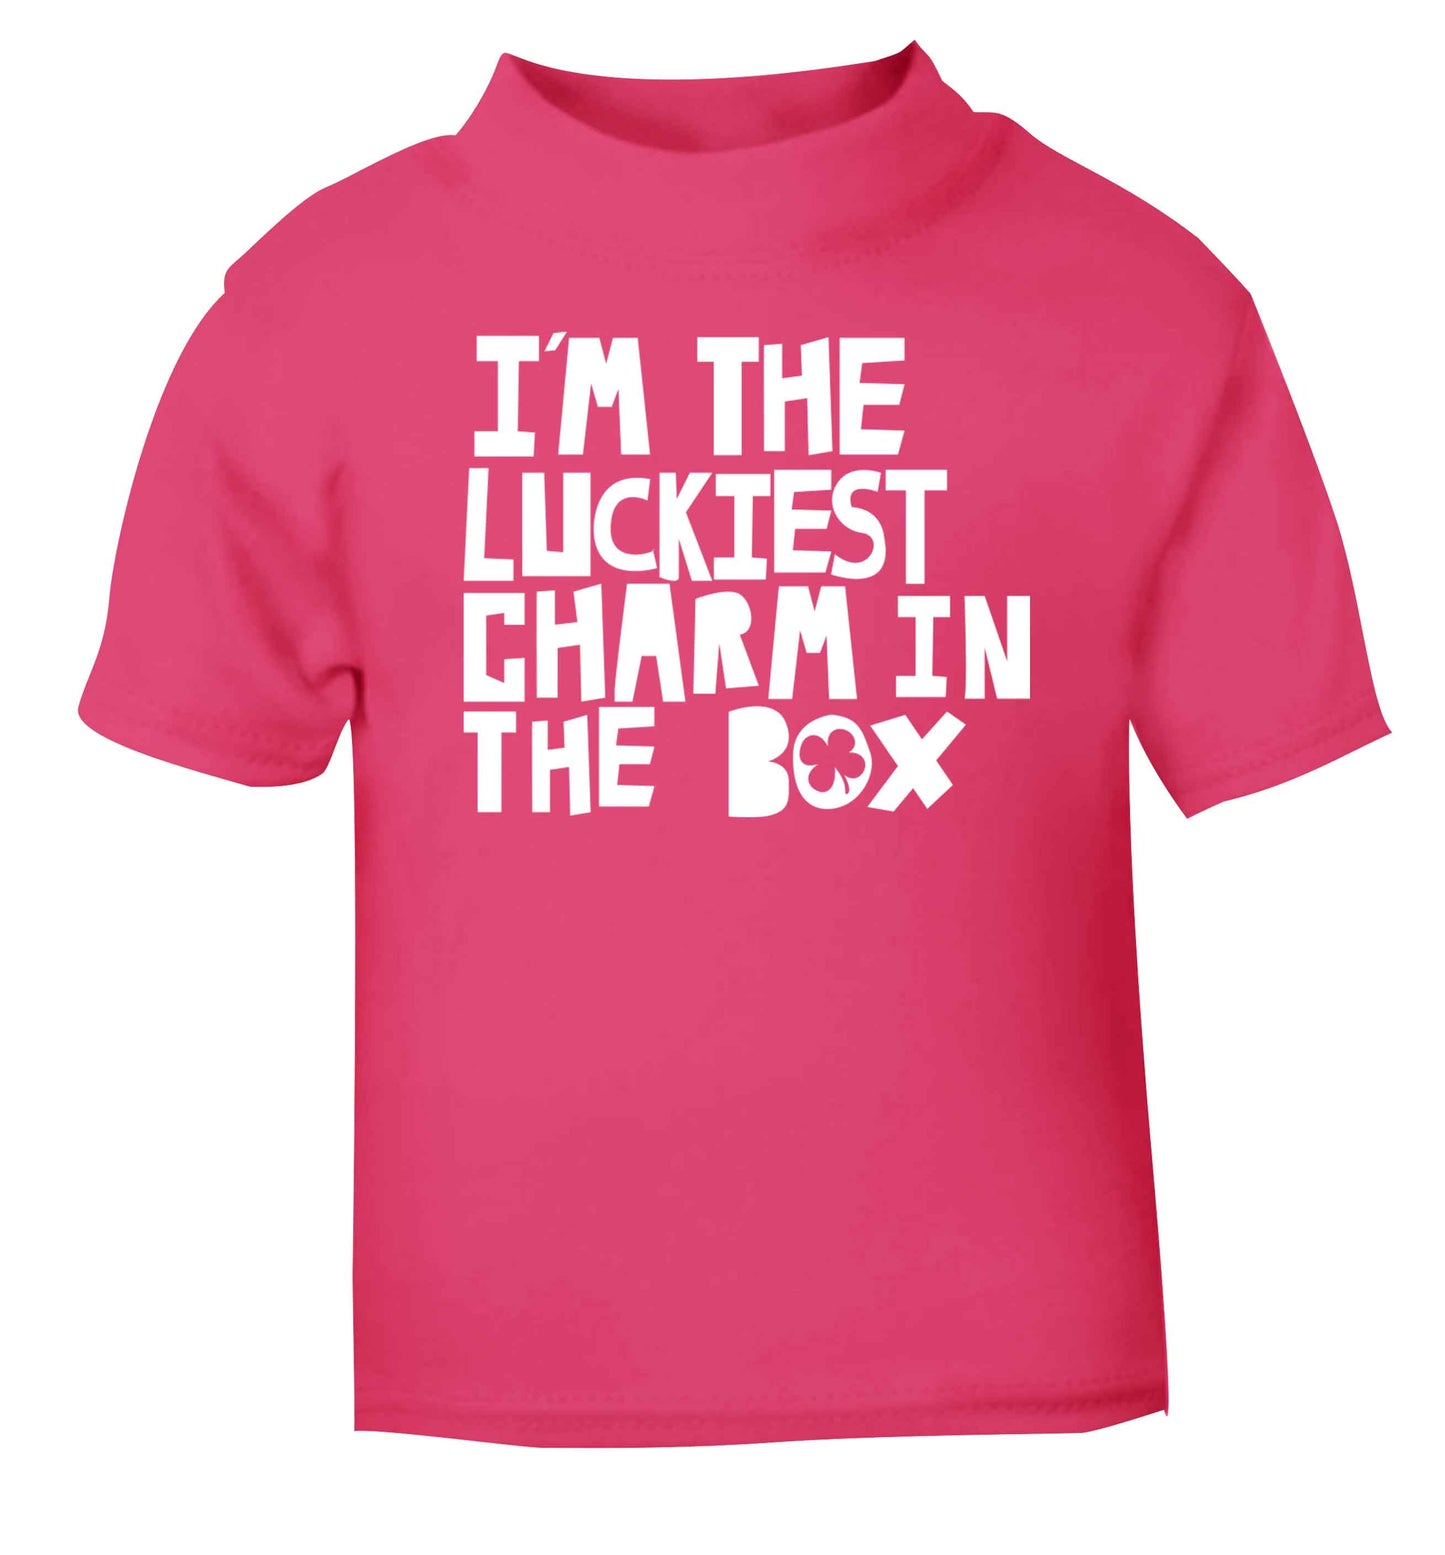 I'm the luckiest charm in the box pink baby toddler Tshirt 2 Years